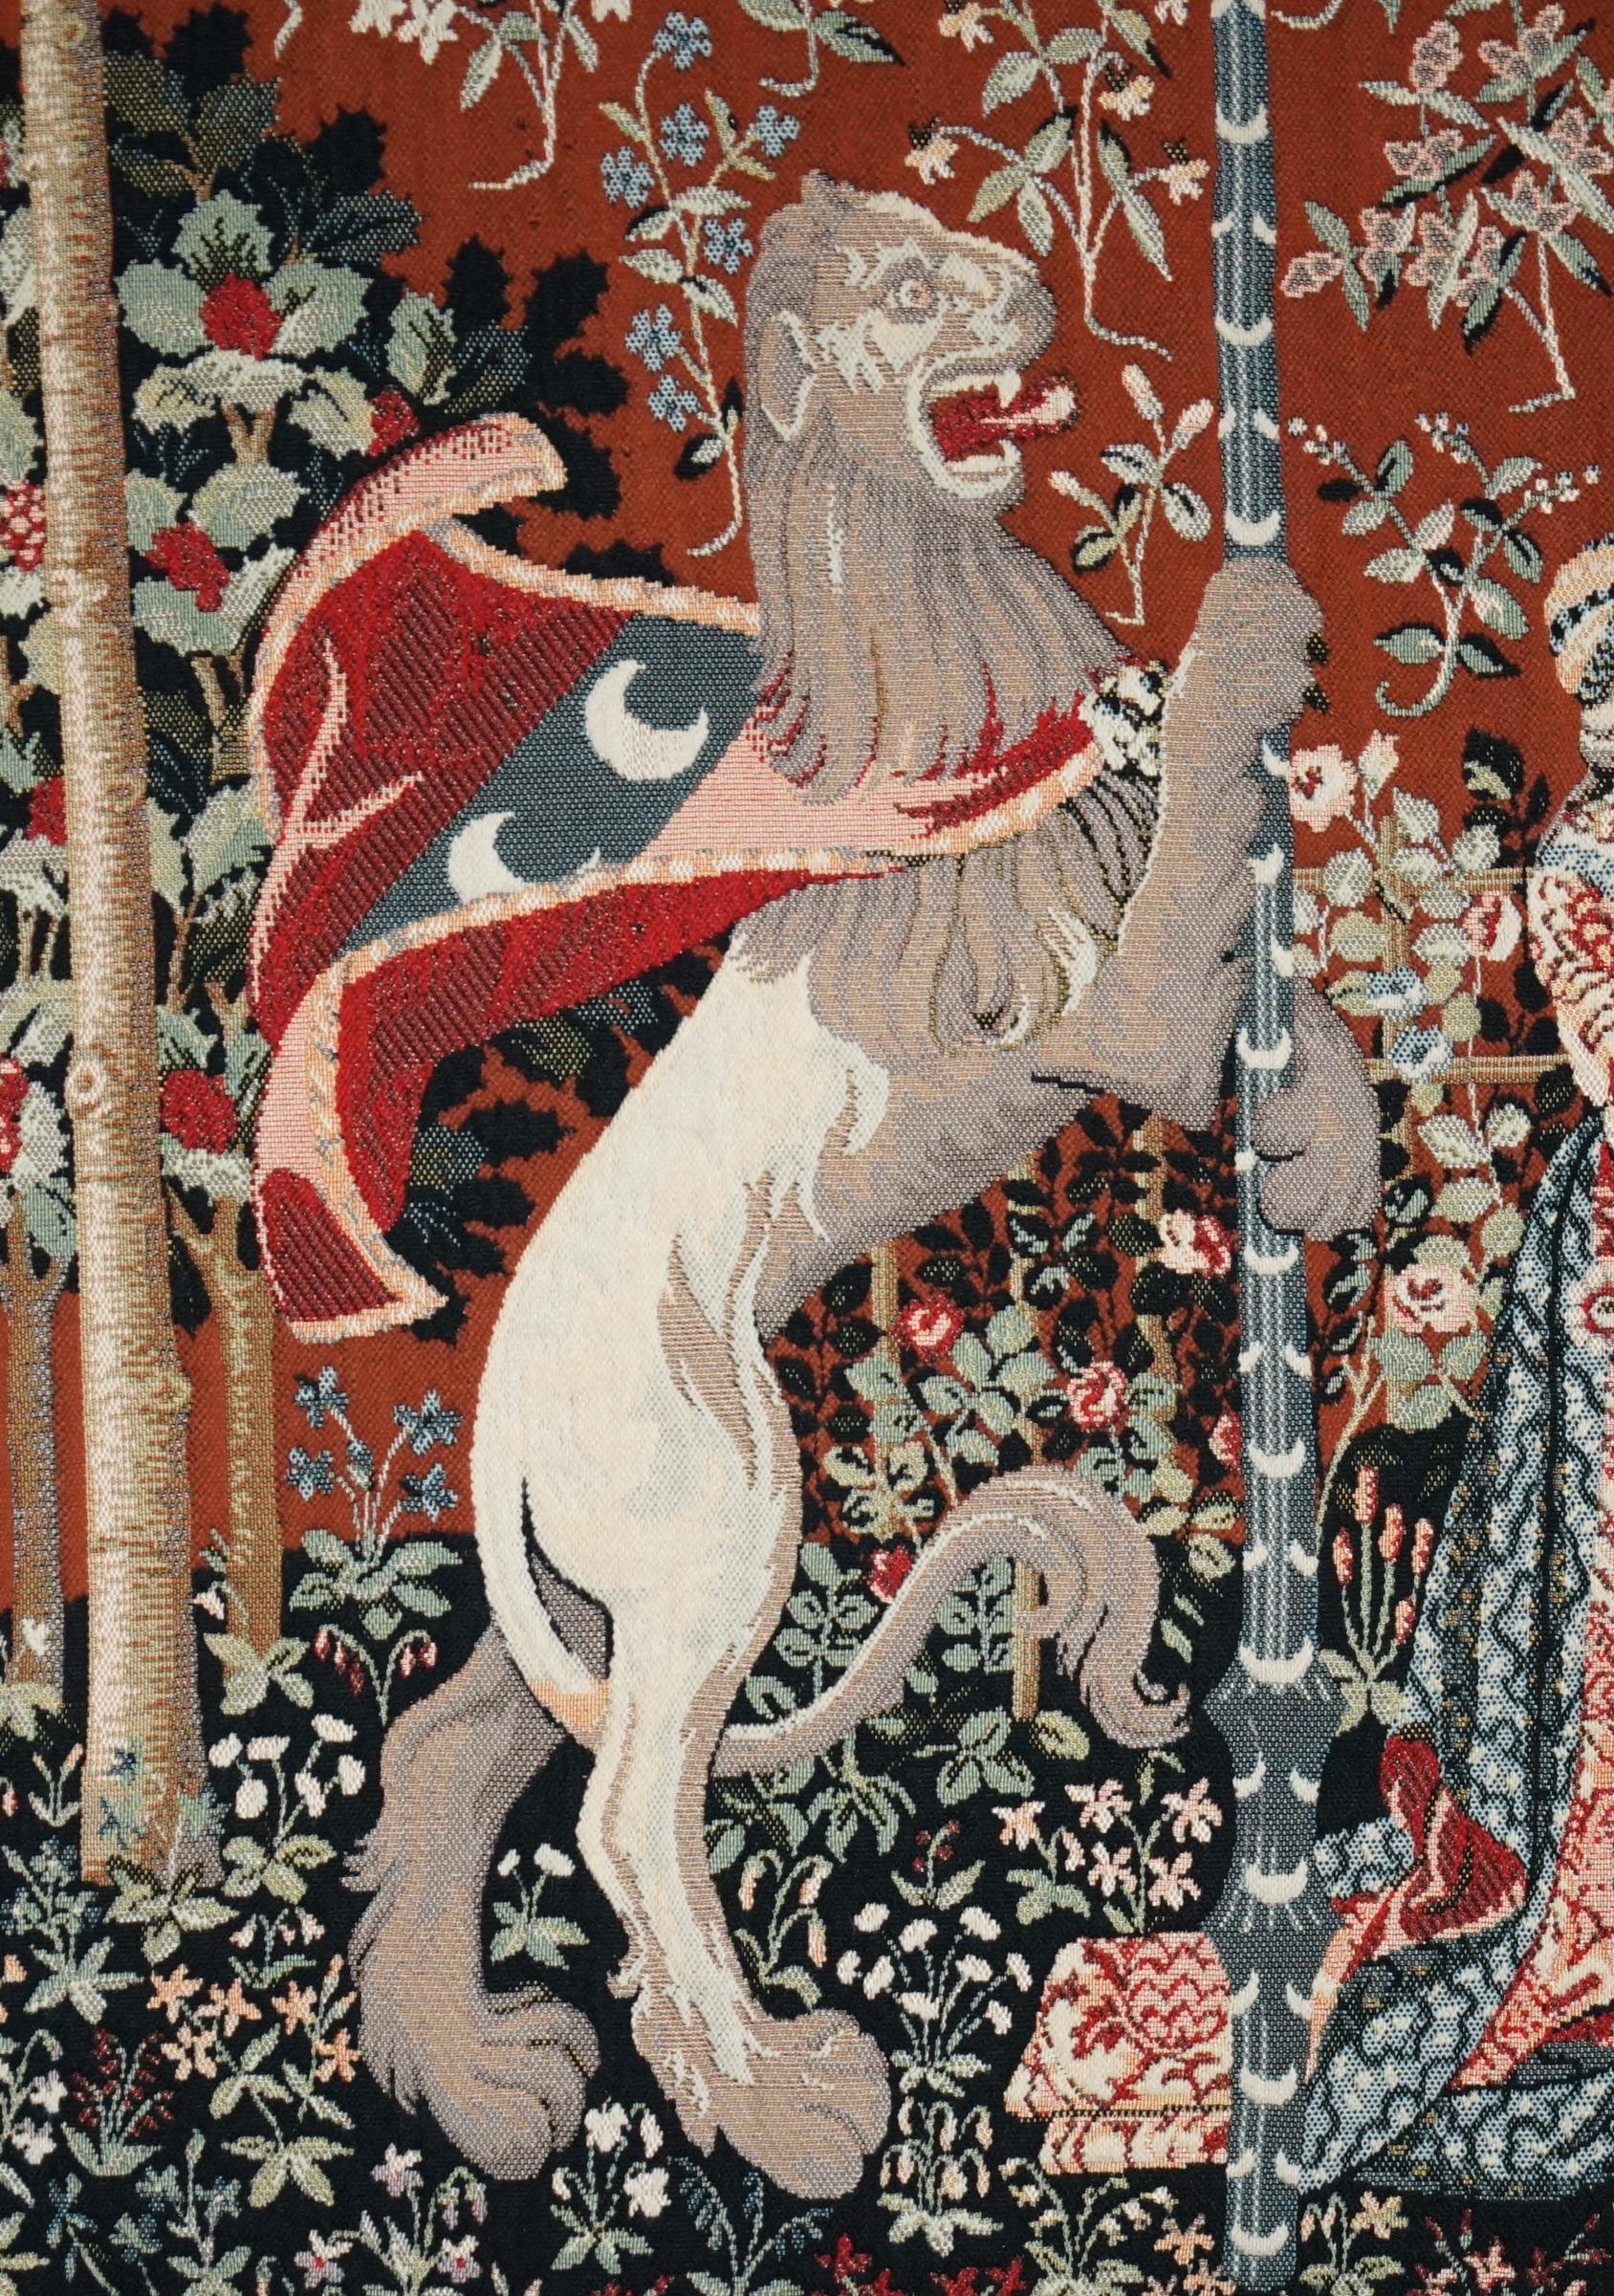 ViNTAGE THE LADY AND THE UNICORN LARGE WALL HANGING WOVEN TAPEStry 216CM X 189CM (Französisch)